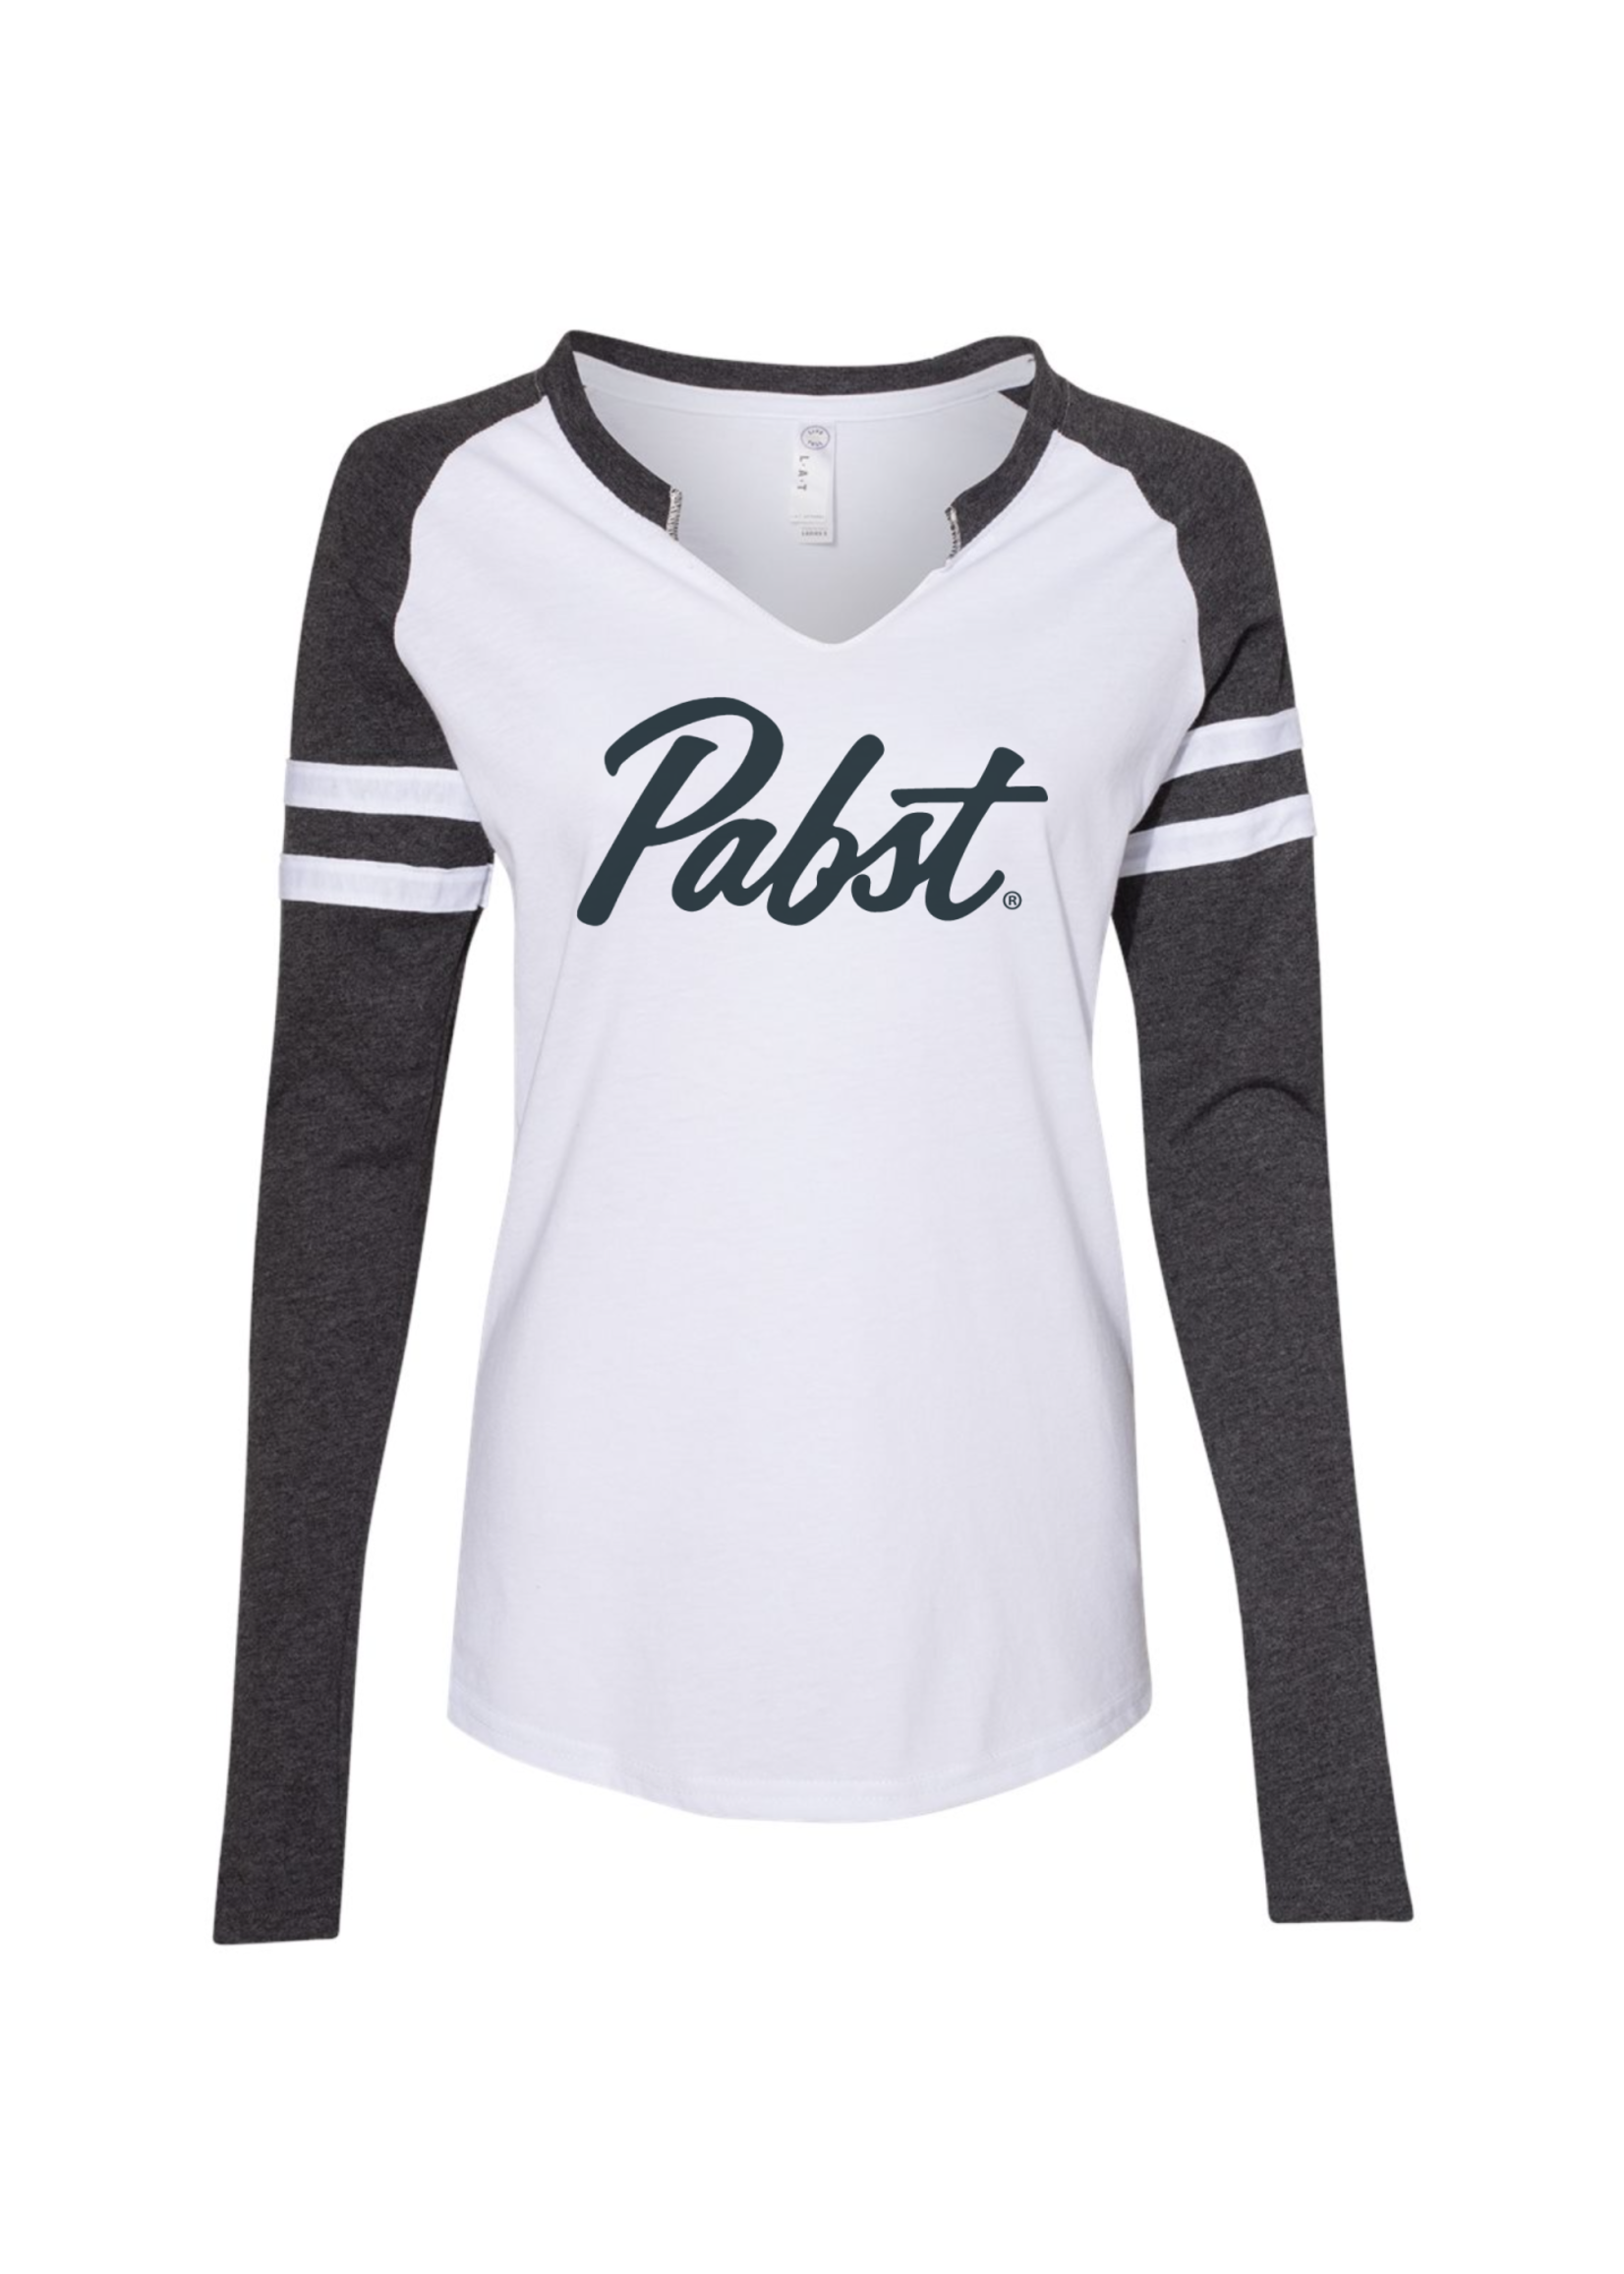 Pabst Women's Pabst Mash Up Long Sleeve Tee